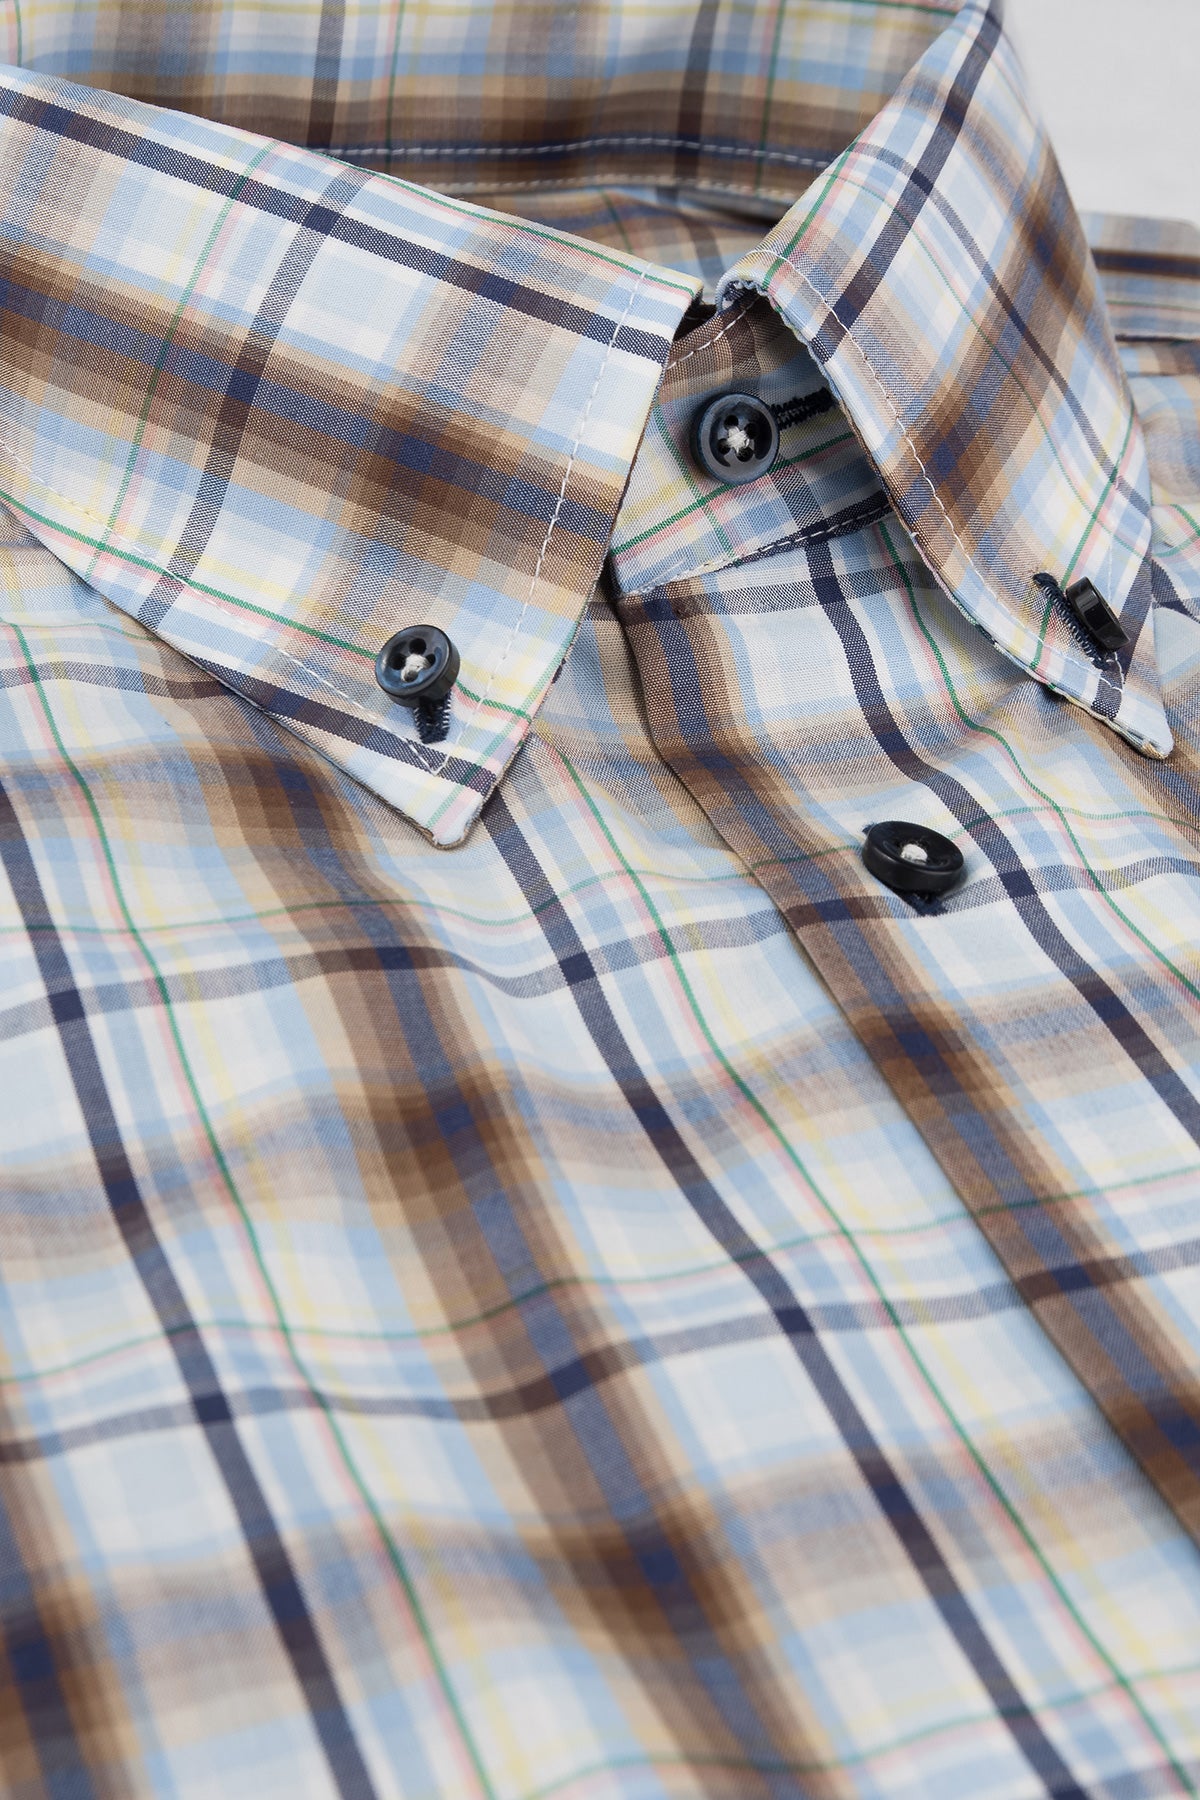 Blue and brown checked short sleeve regular fit shirt